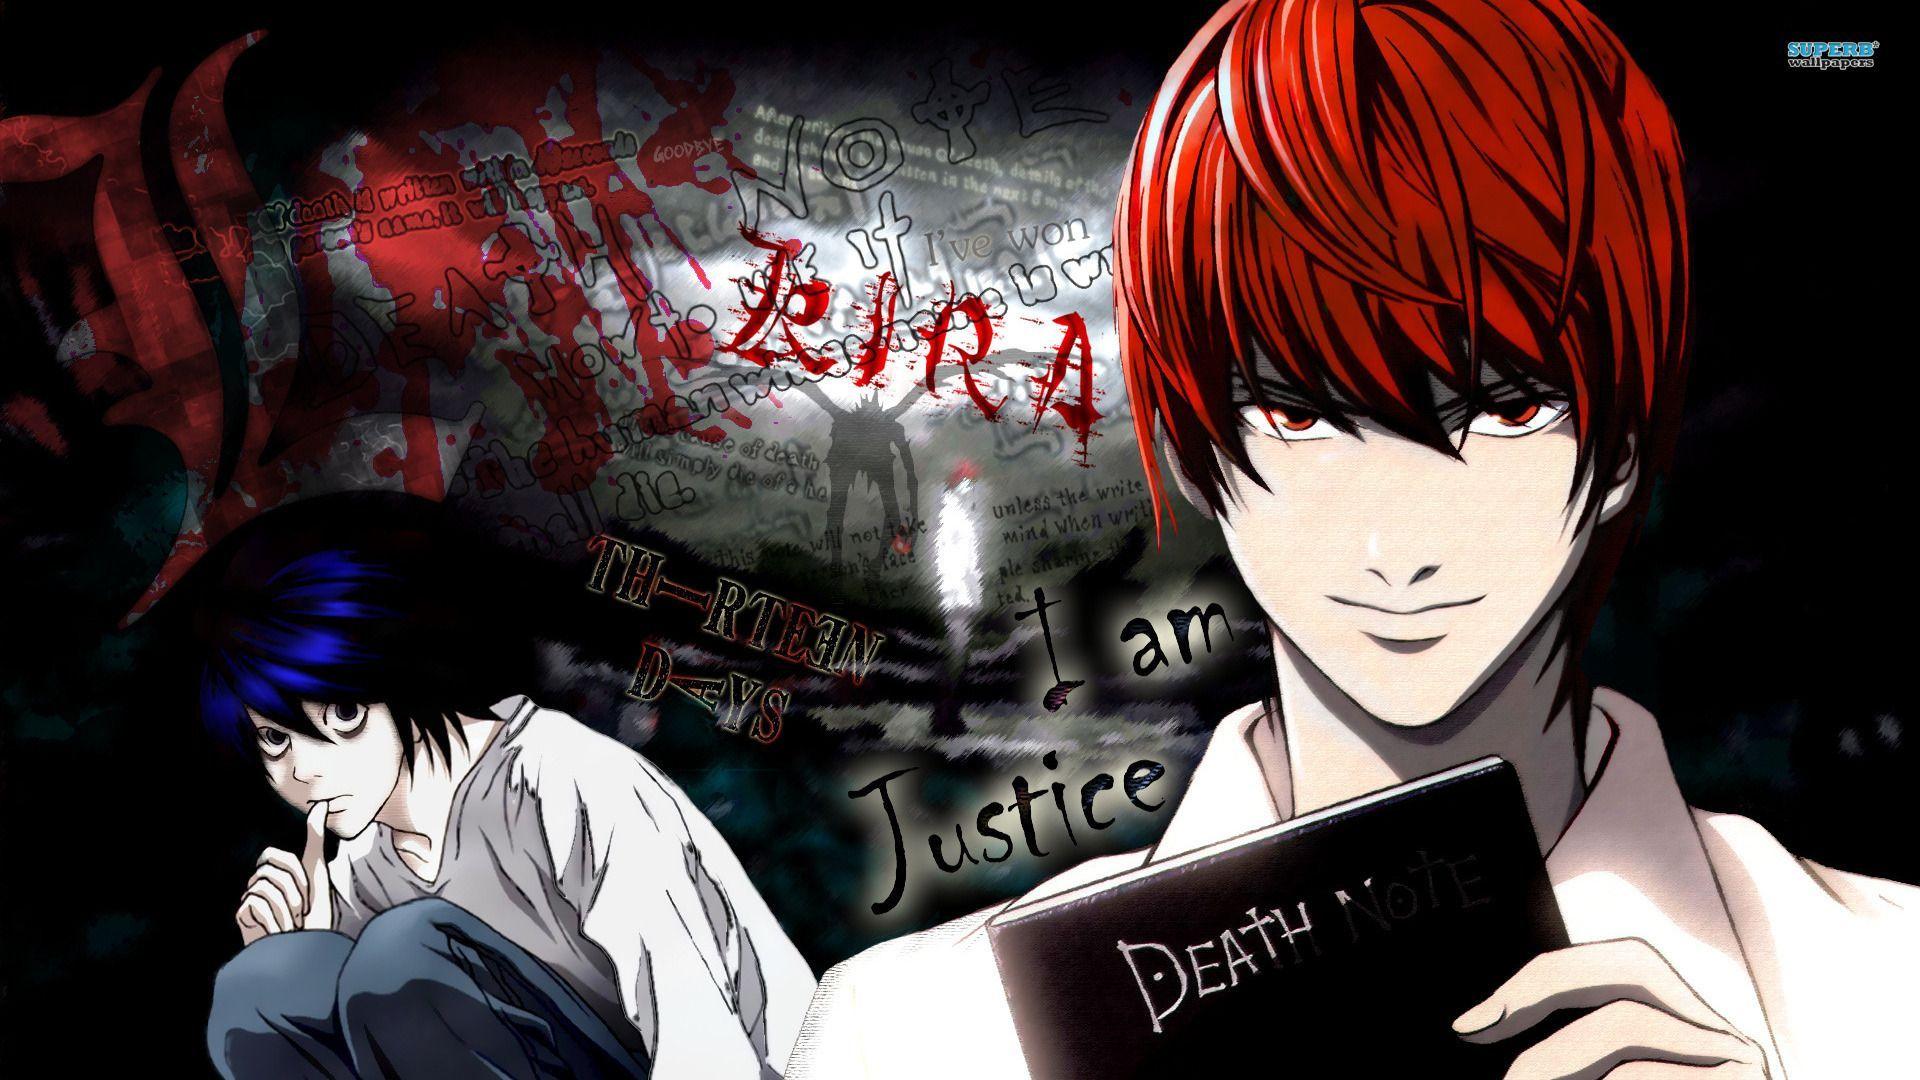 Death Note Wallpaper High Quality Download Free. HD Wallpaper